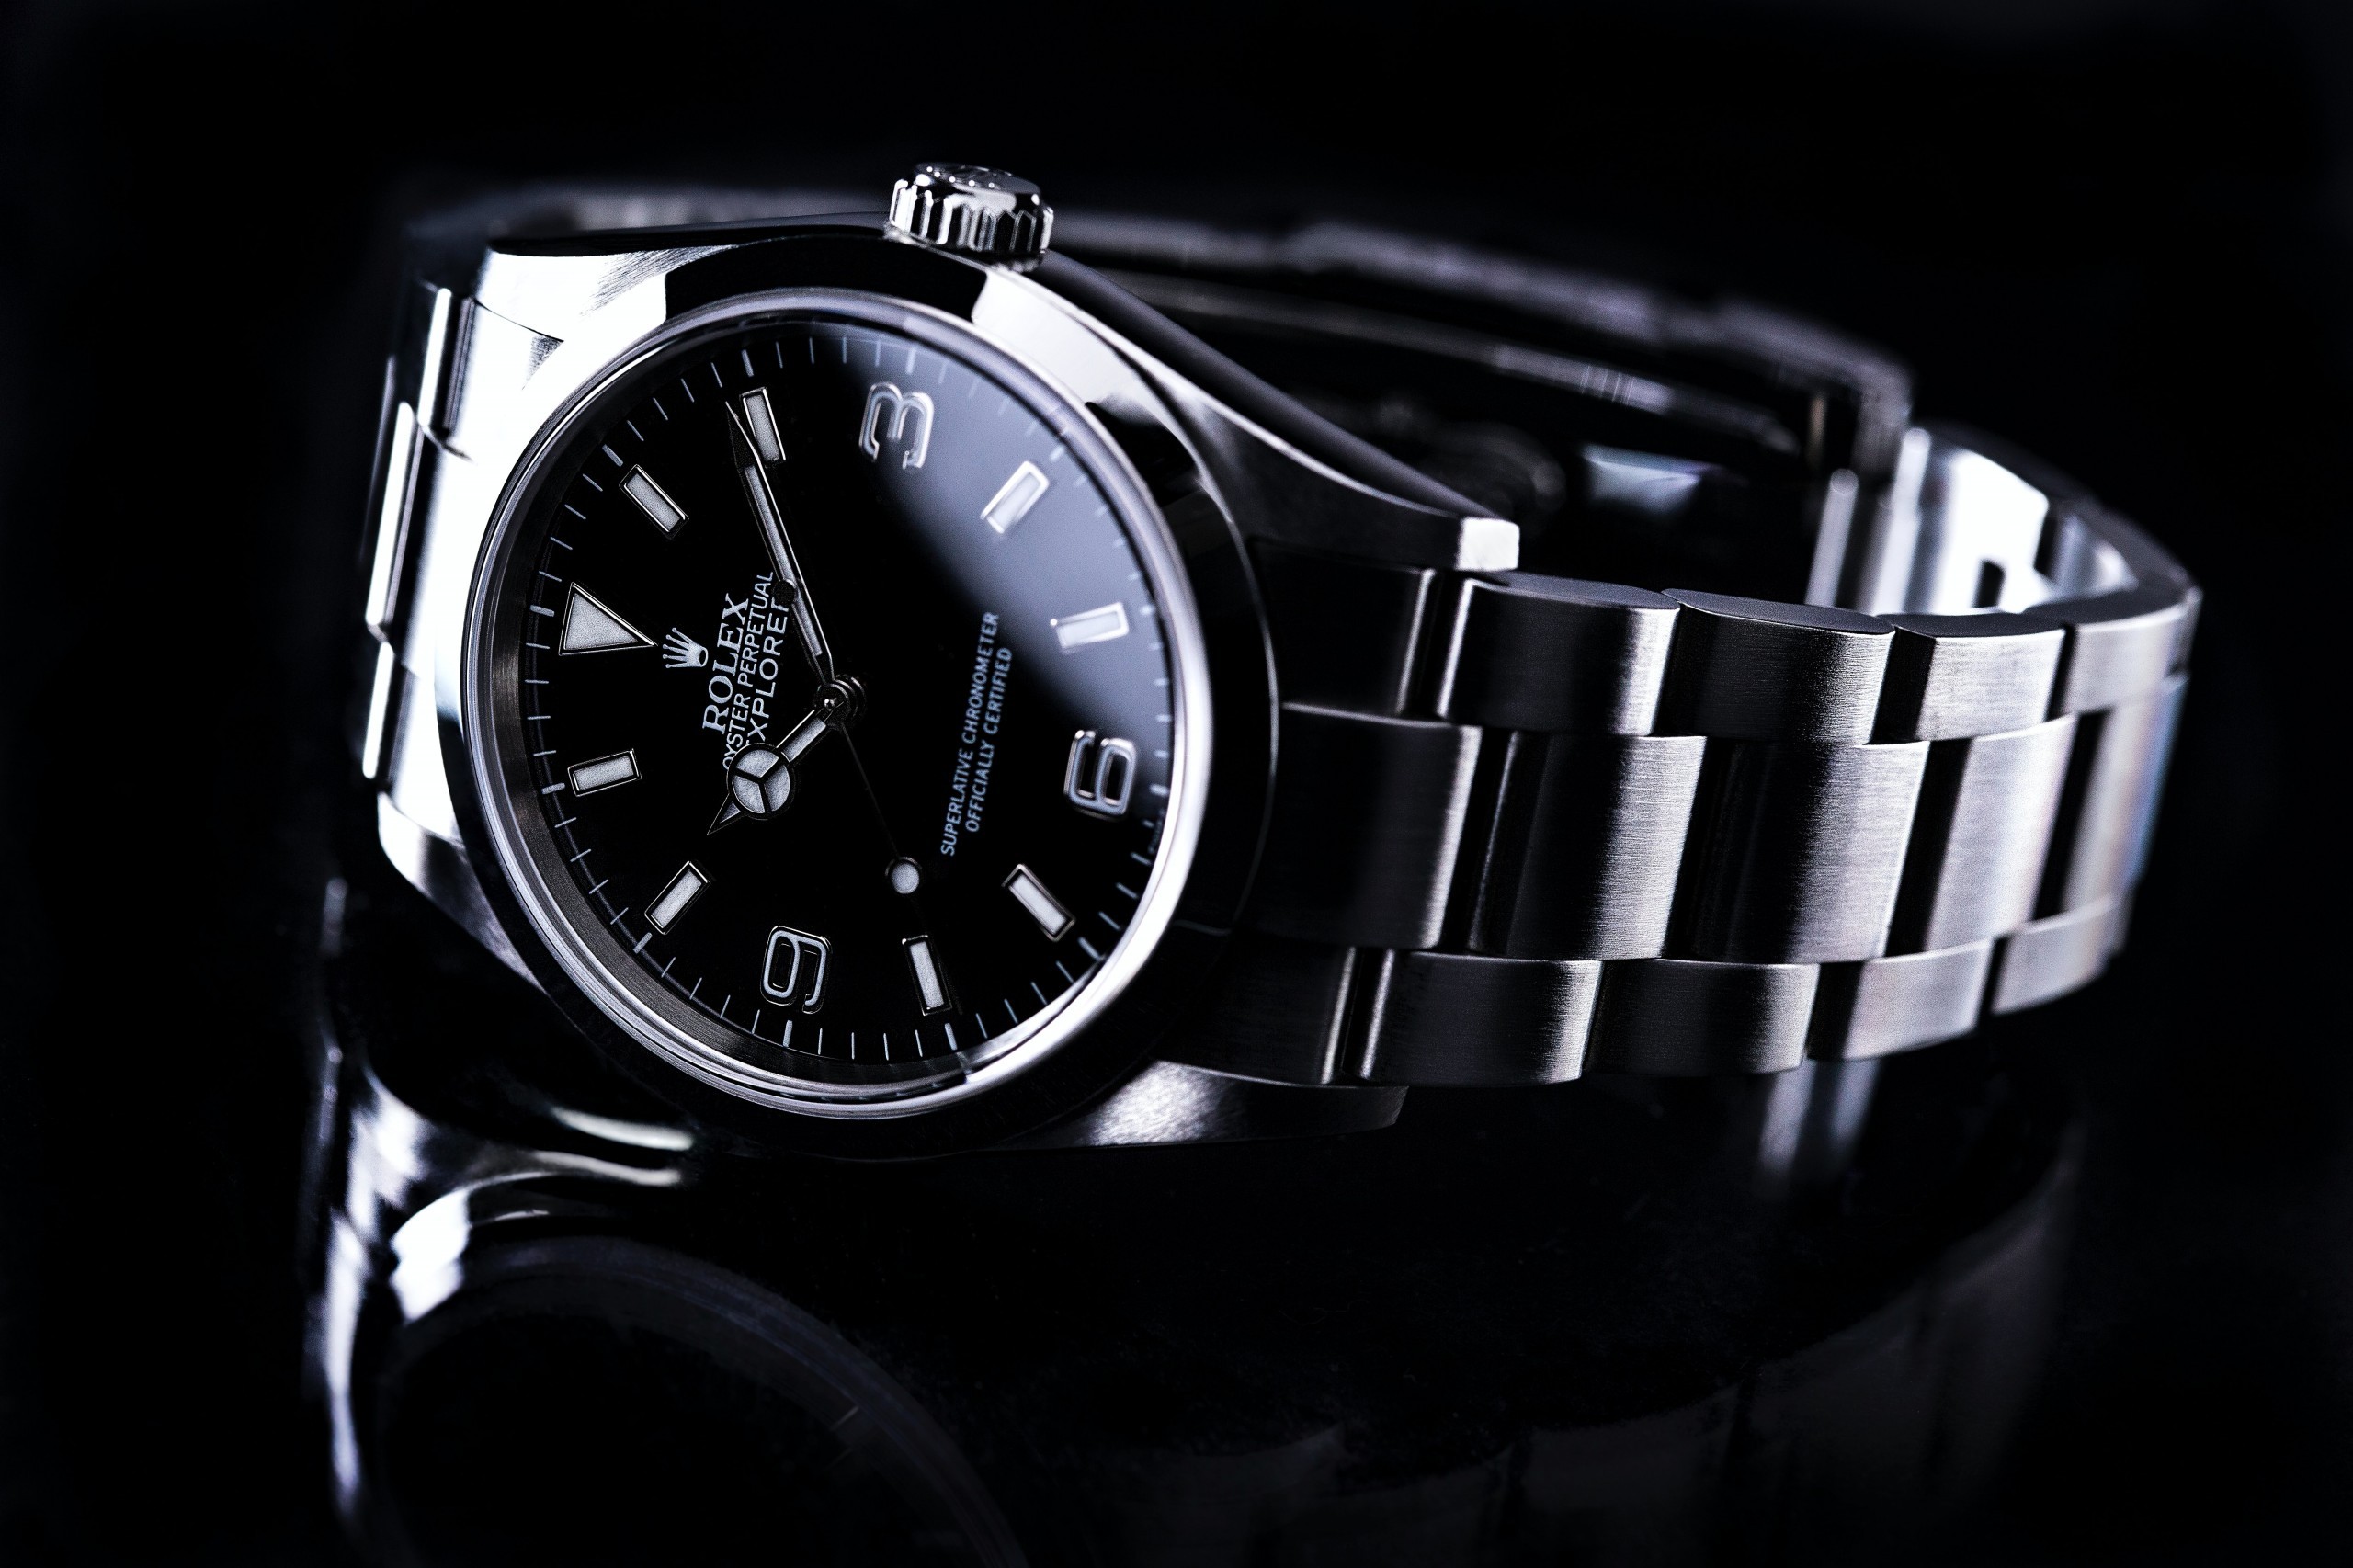 Image of a Rolex watch